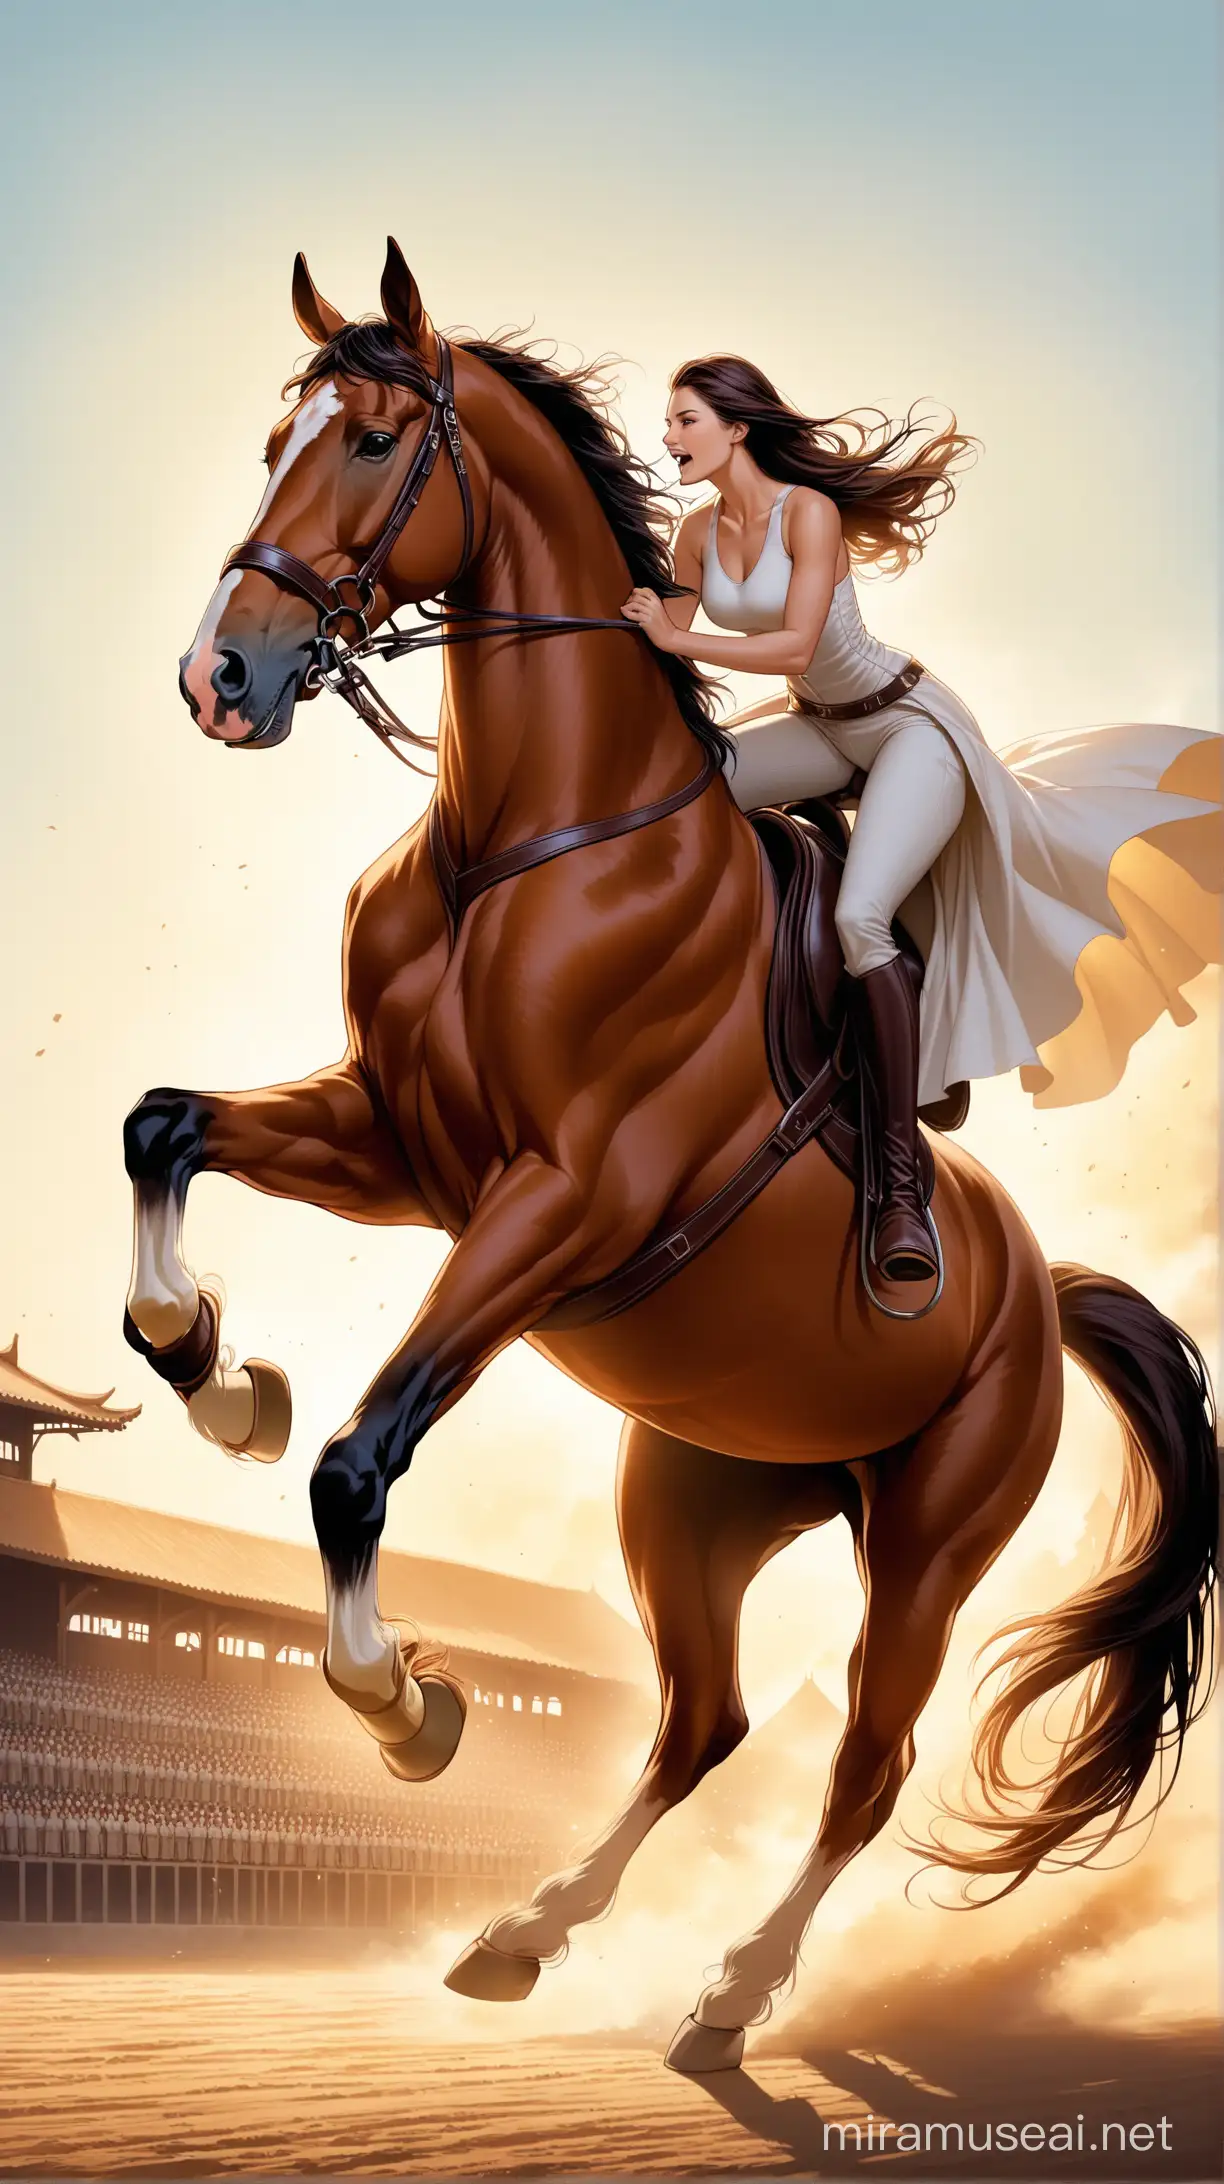 The lady tall and the boy riding horse, the horse's legs are in the air and that lady sitting on it, and the boy is holding onto the horse, to create an incredible scene, horse showing some crazy action would make it amazing With good anatomy